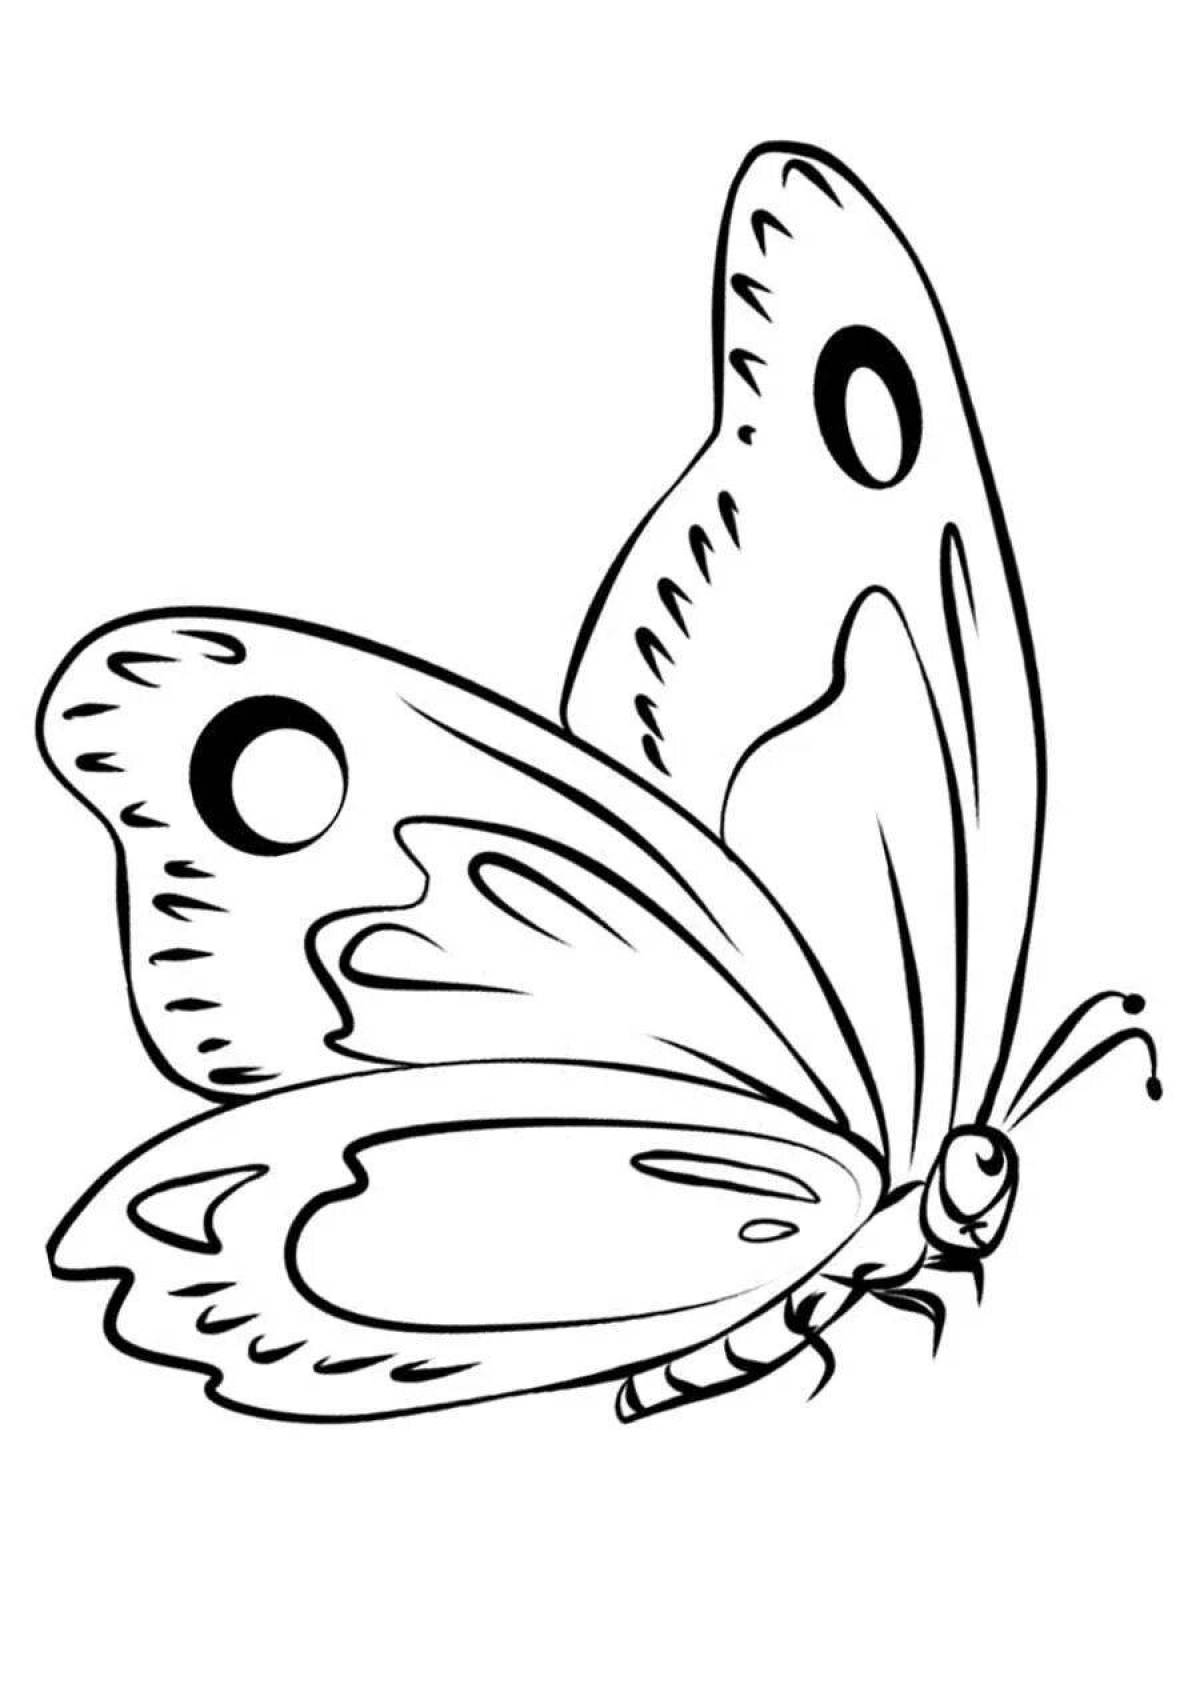 Coloring butterfly for kids